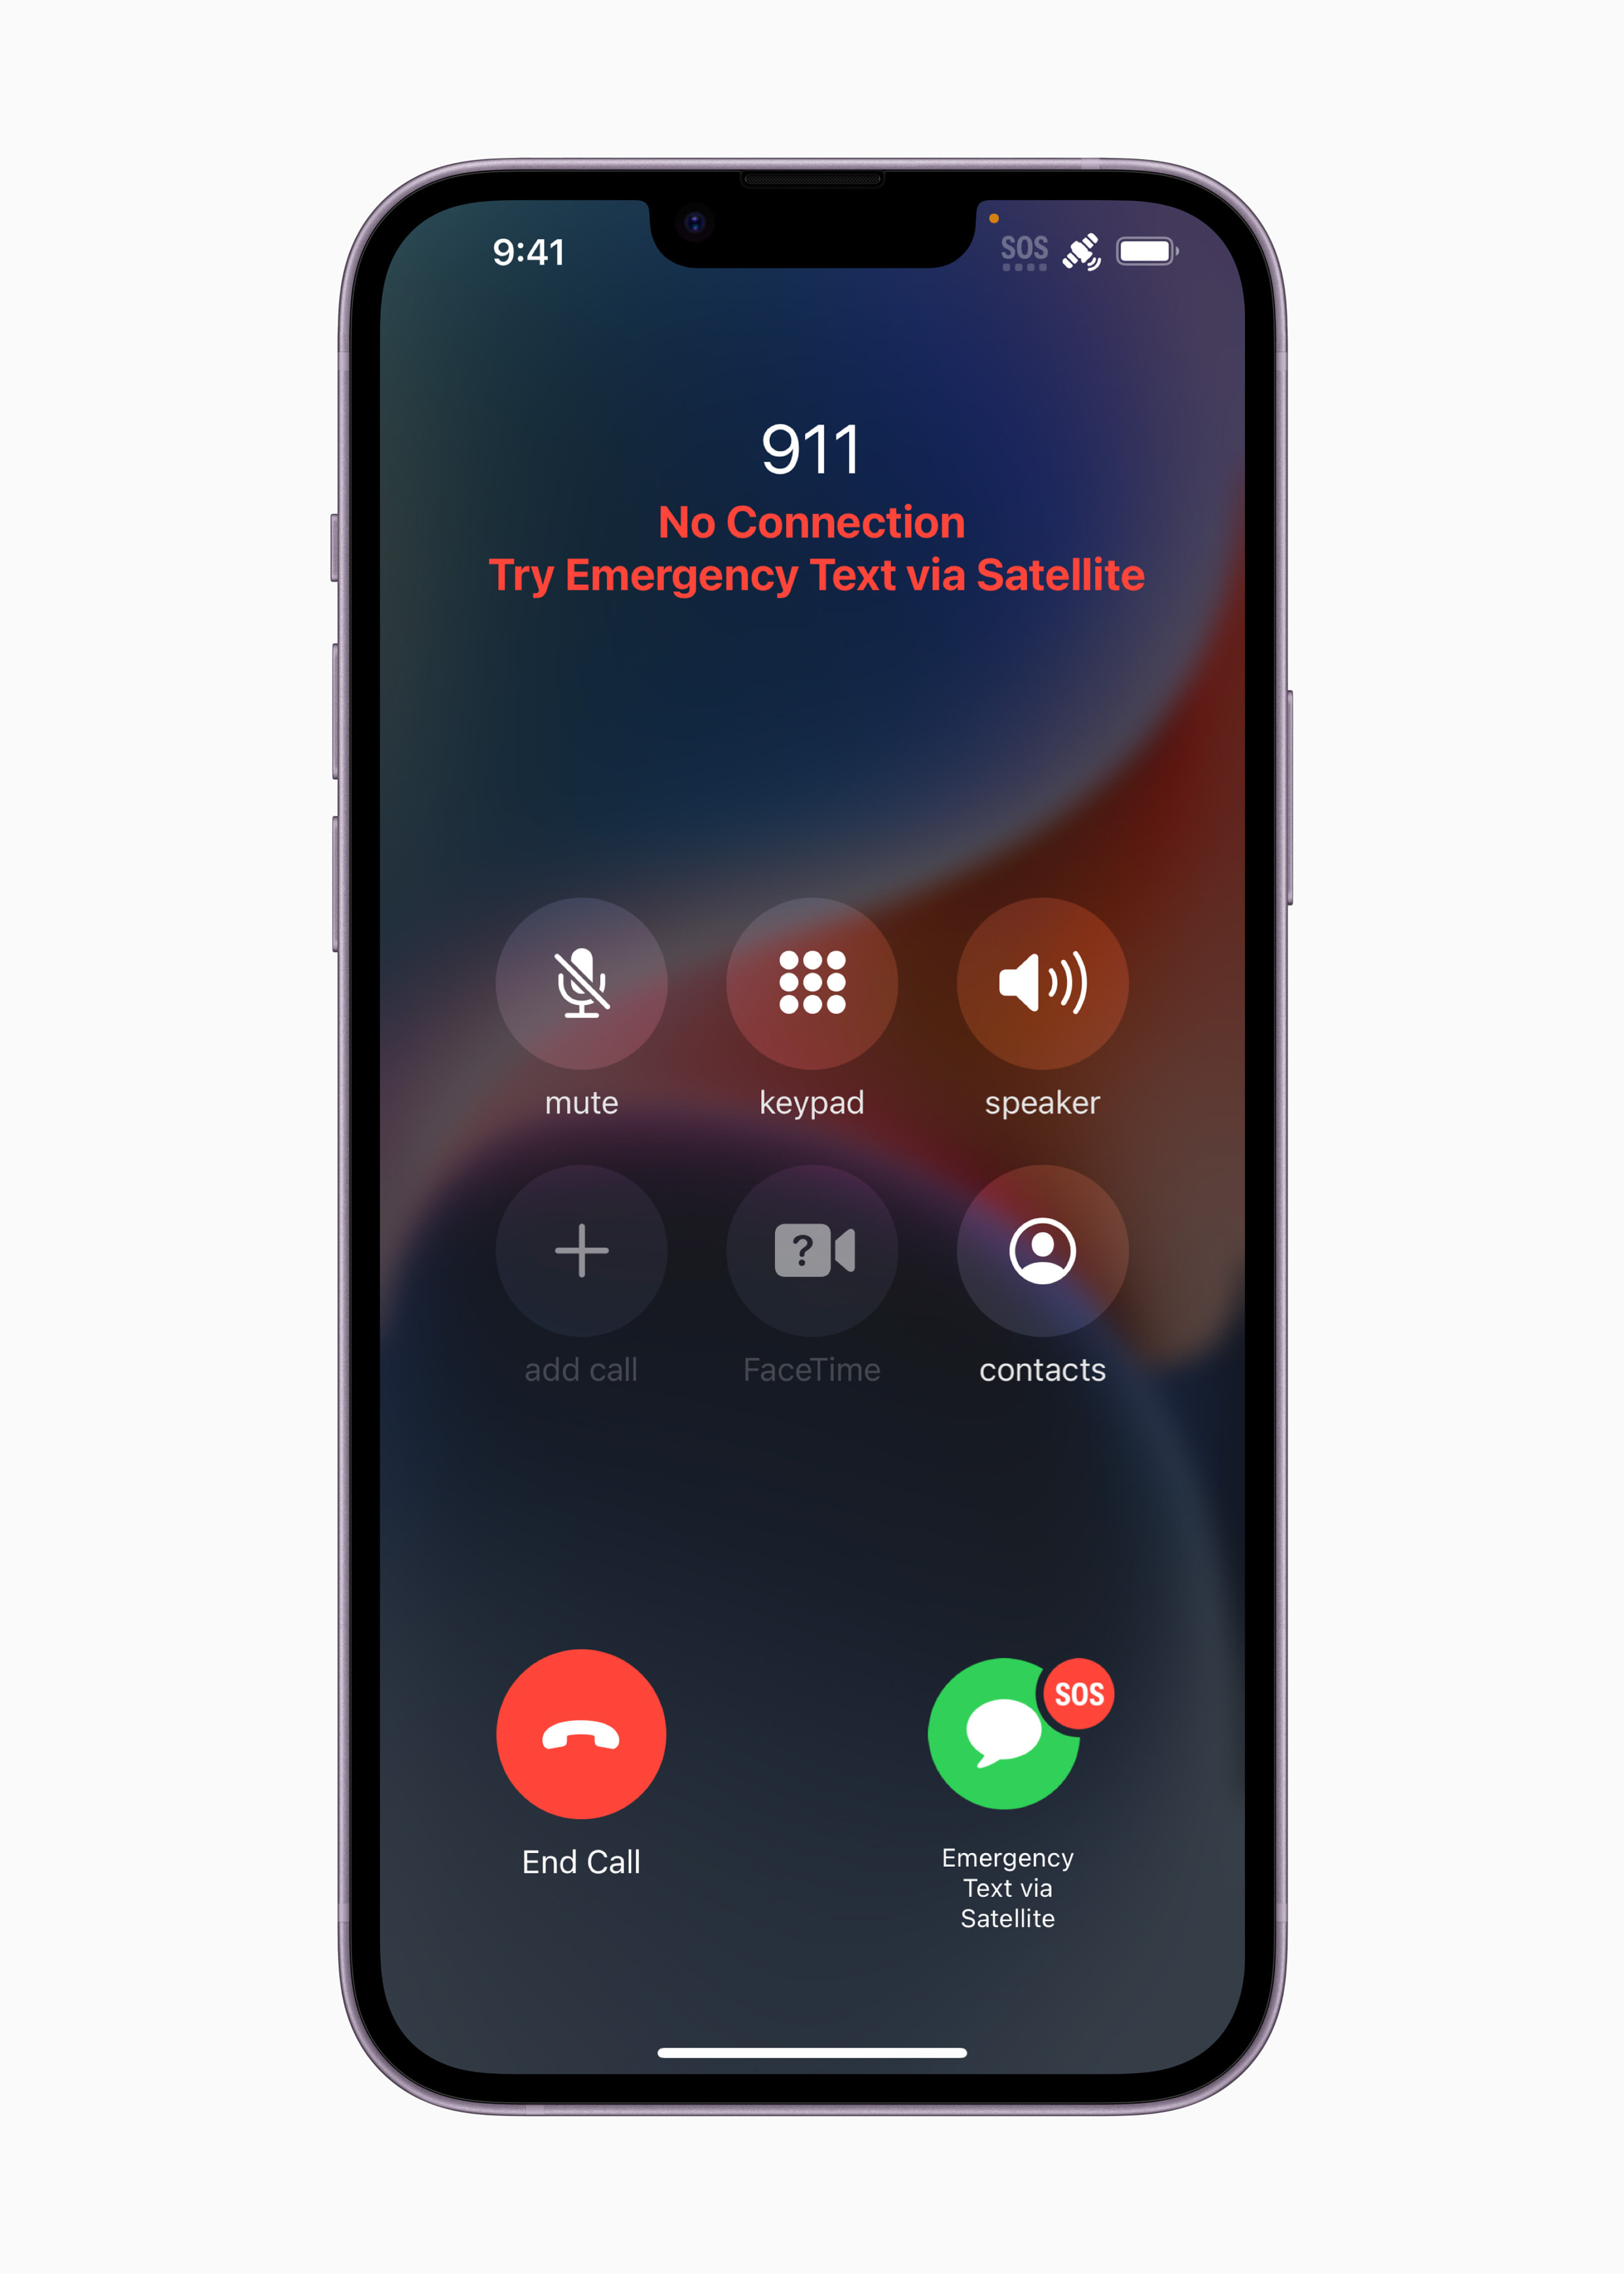 things you didn't know your phone can do - iphone 911 call - 911 No Connection Try Emergency Text via Satellite Zh mute add call C End Call keypad ? Sos FaceTime speaker contacts Sos Emergency Text via Satellite